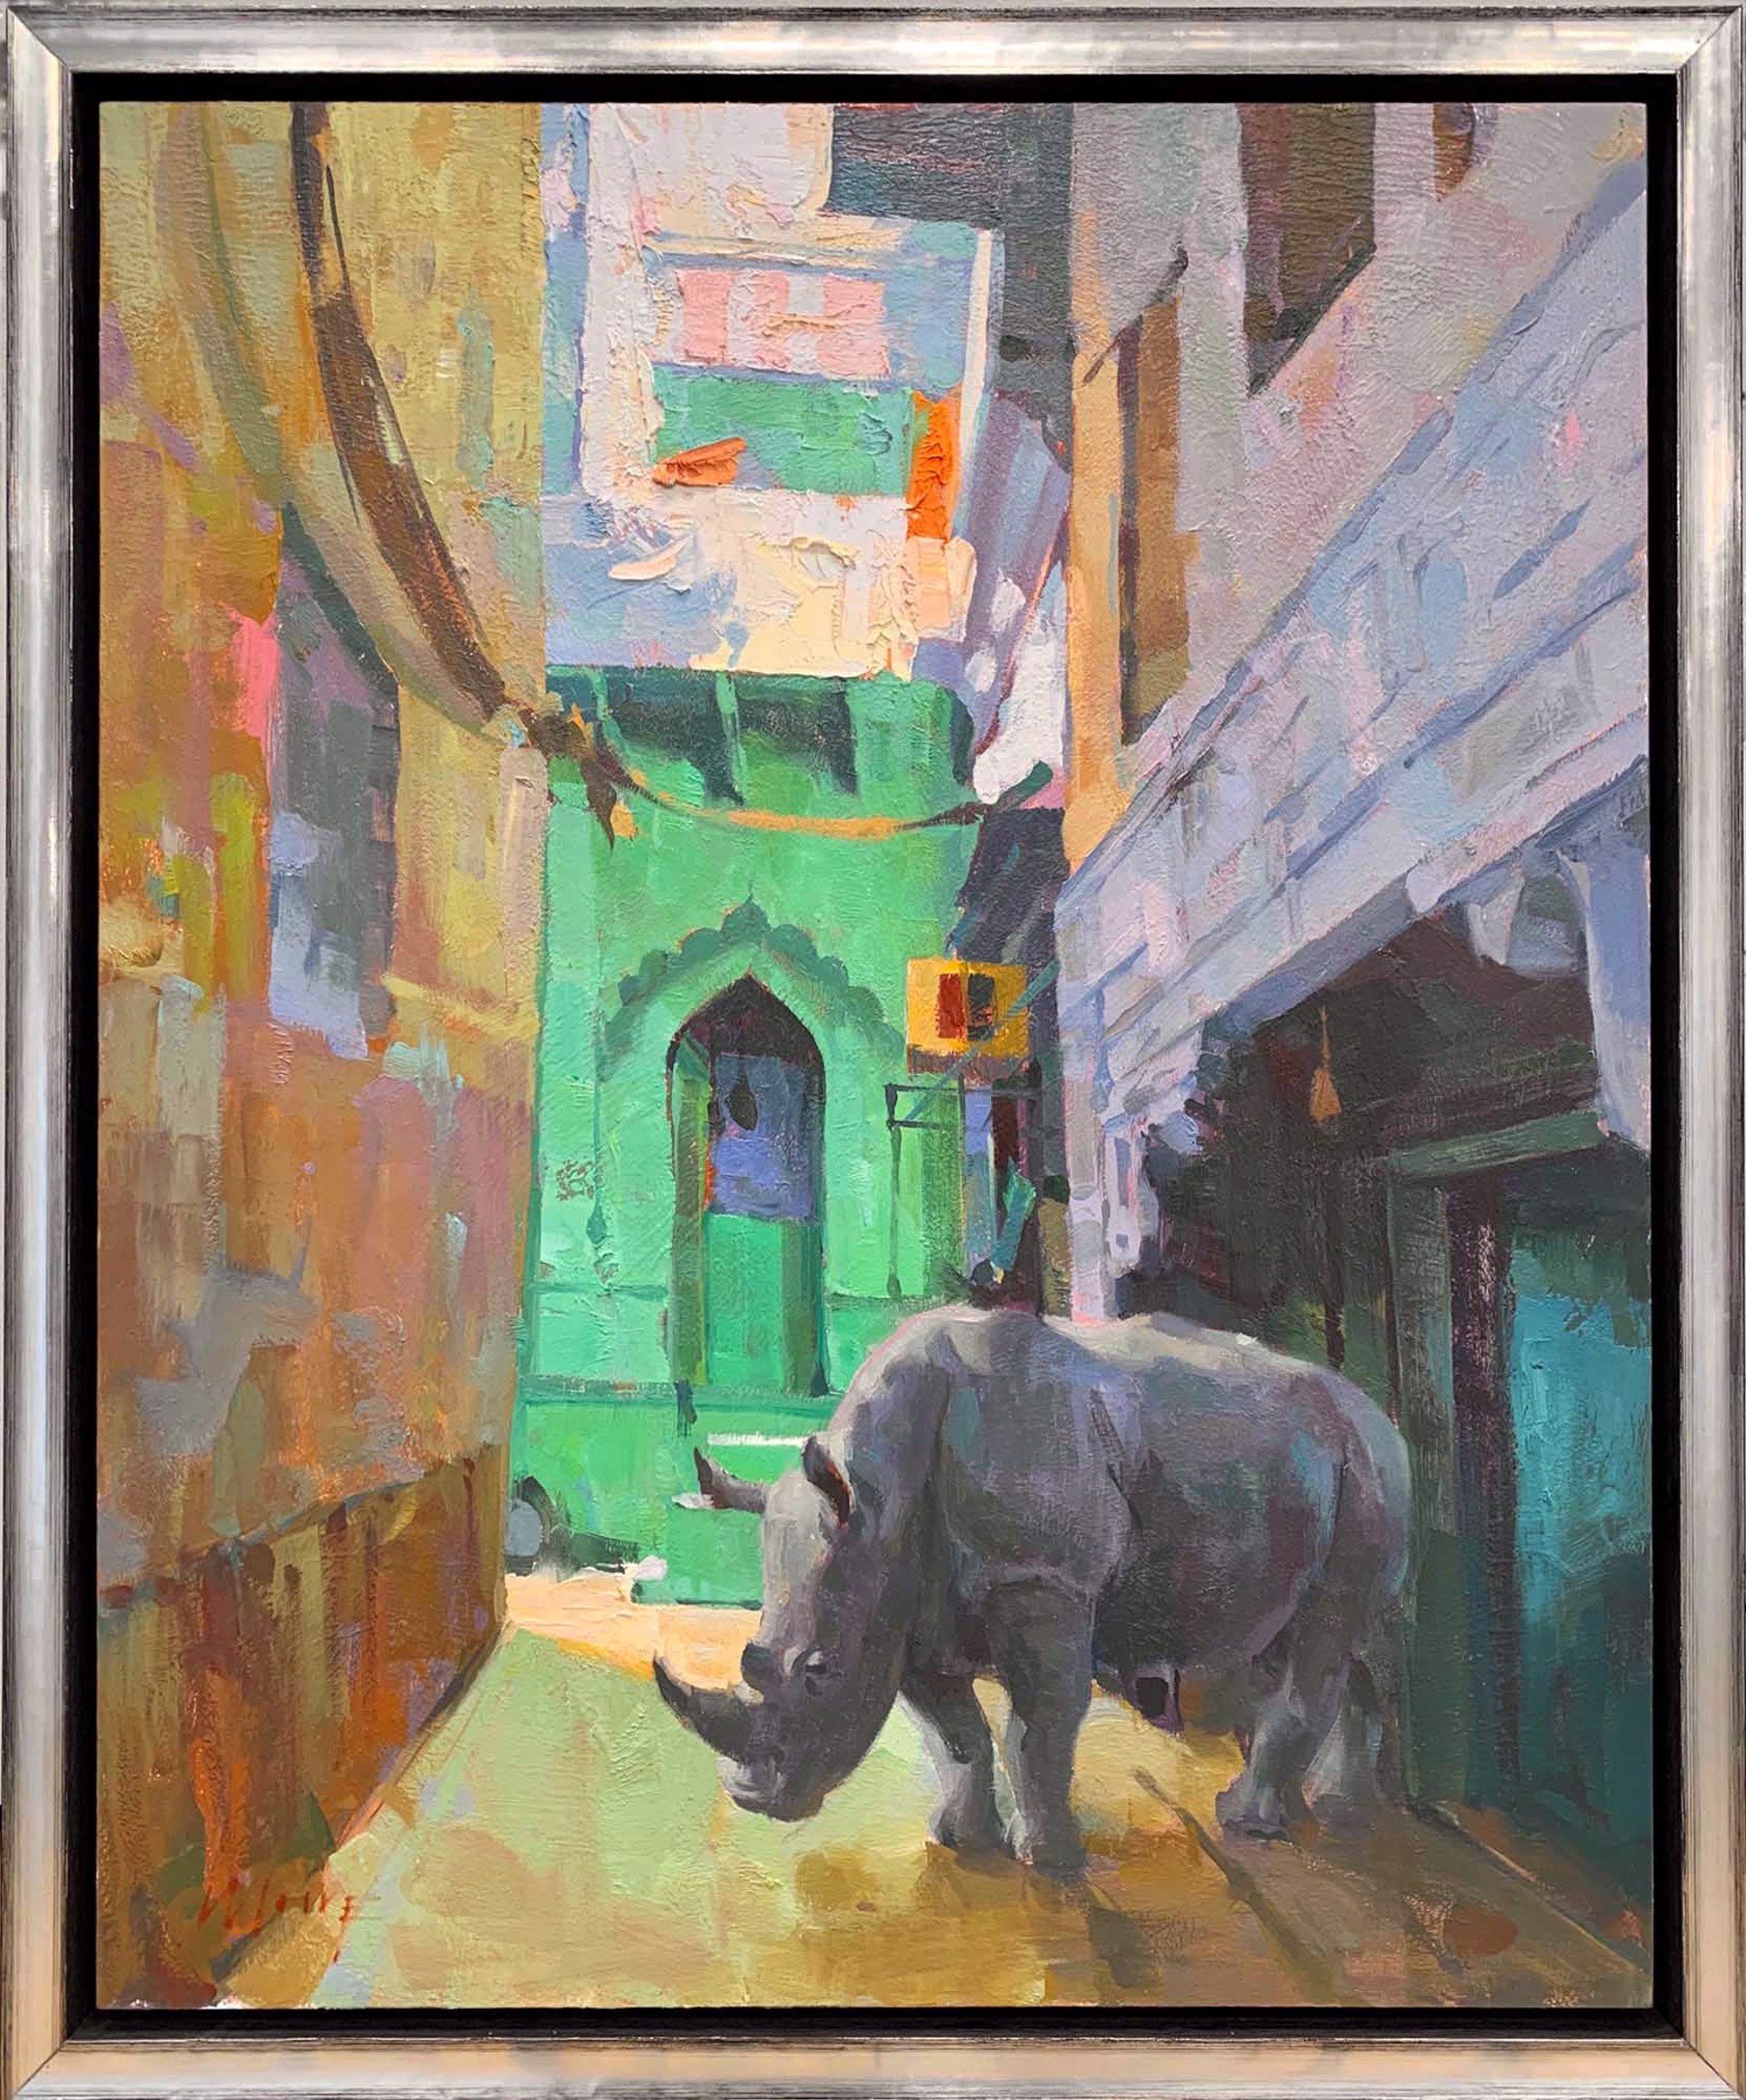 A Rhino Stands In A Brightly Colored Narrow Alley In India, Abstract Original Oil Painting By Larry Moore